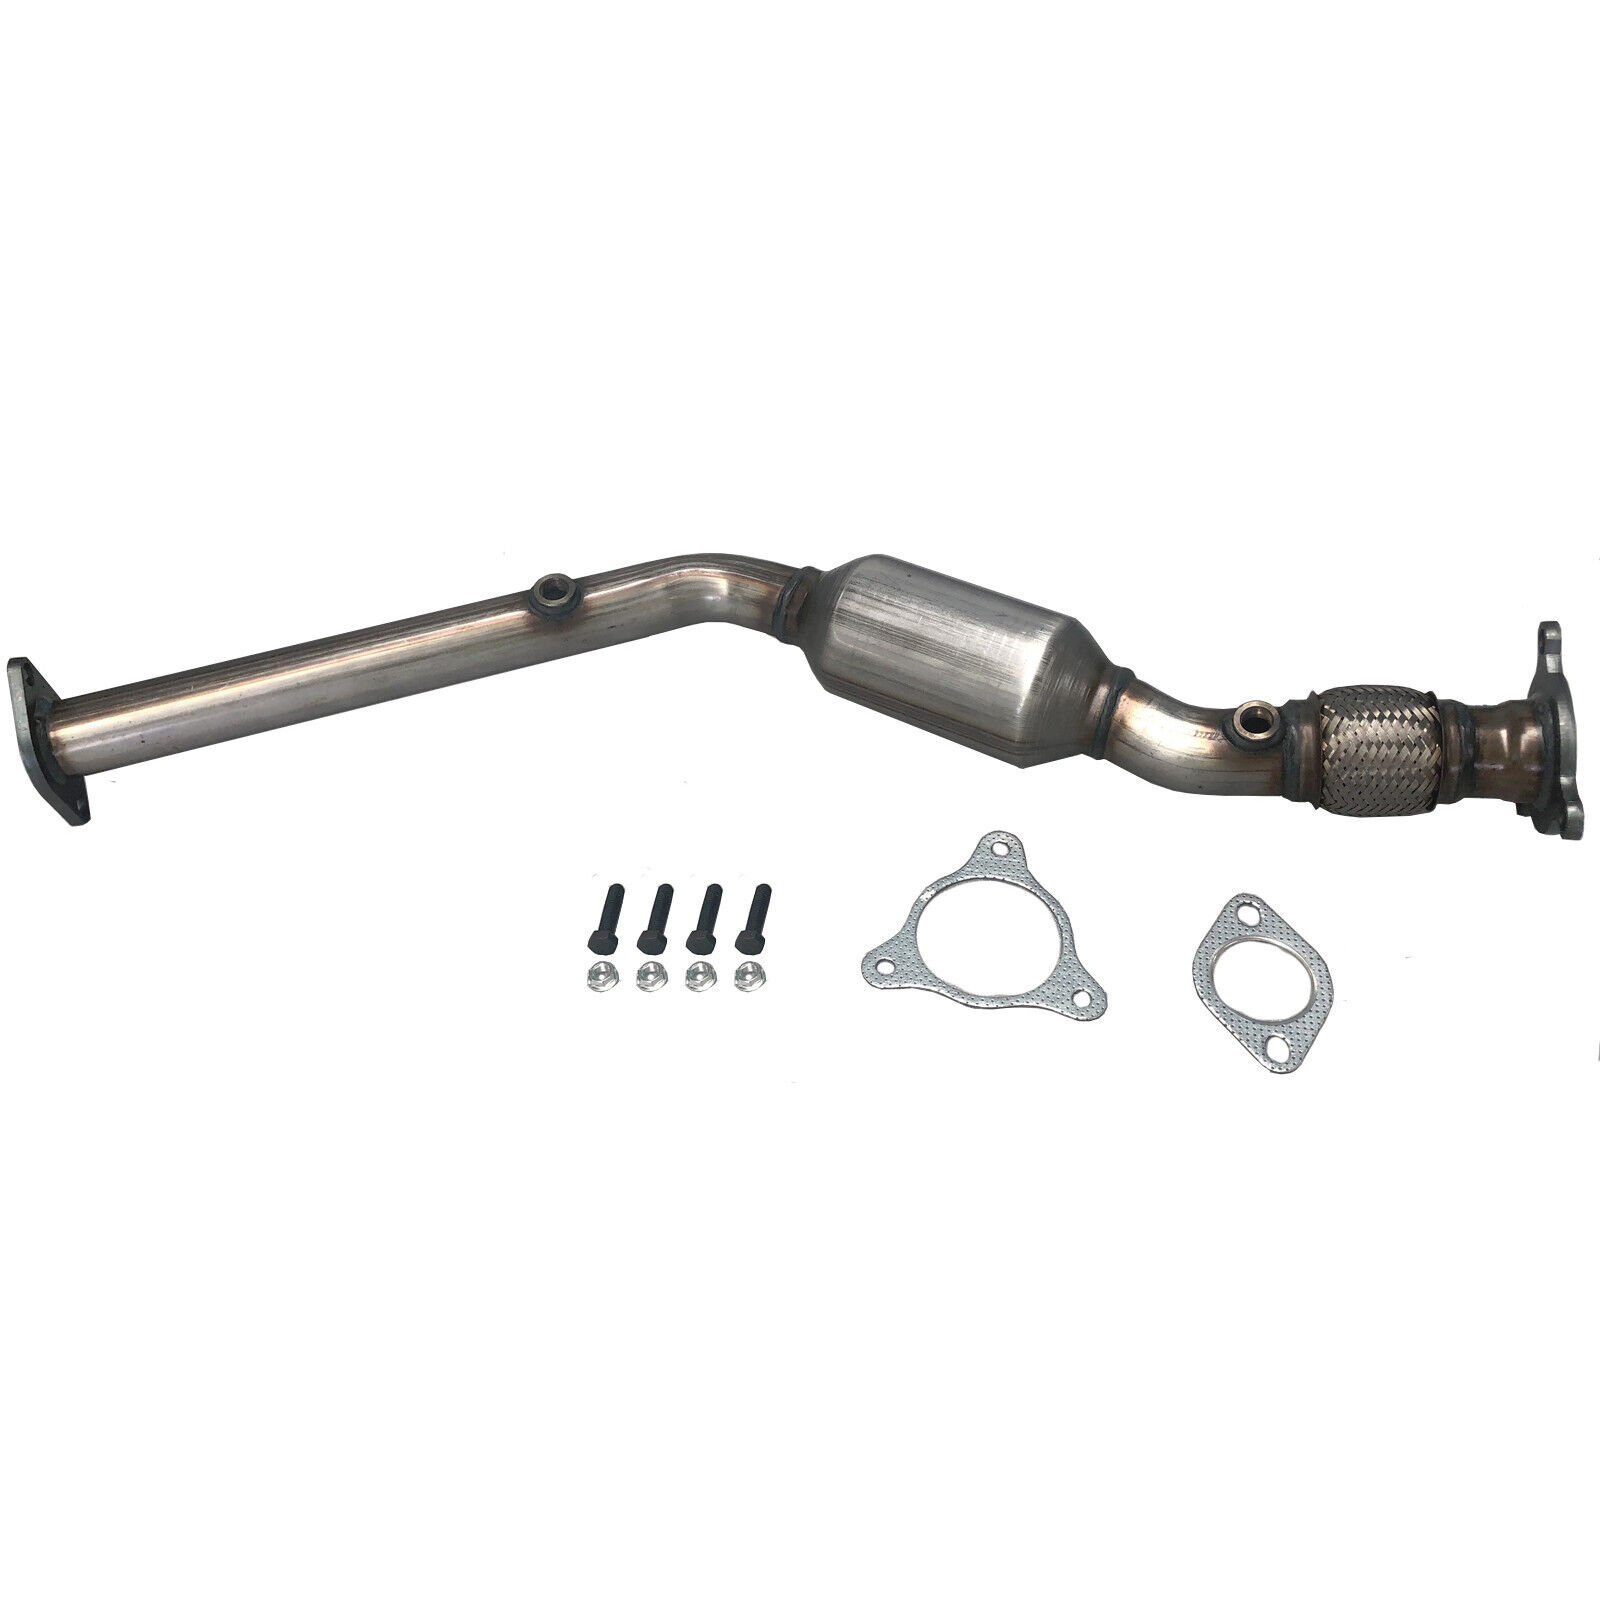 Catalytic Converter for 2005-2007 Saturn Ion Chevy Cobalt 2.2L EPA Certification